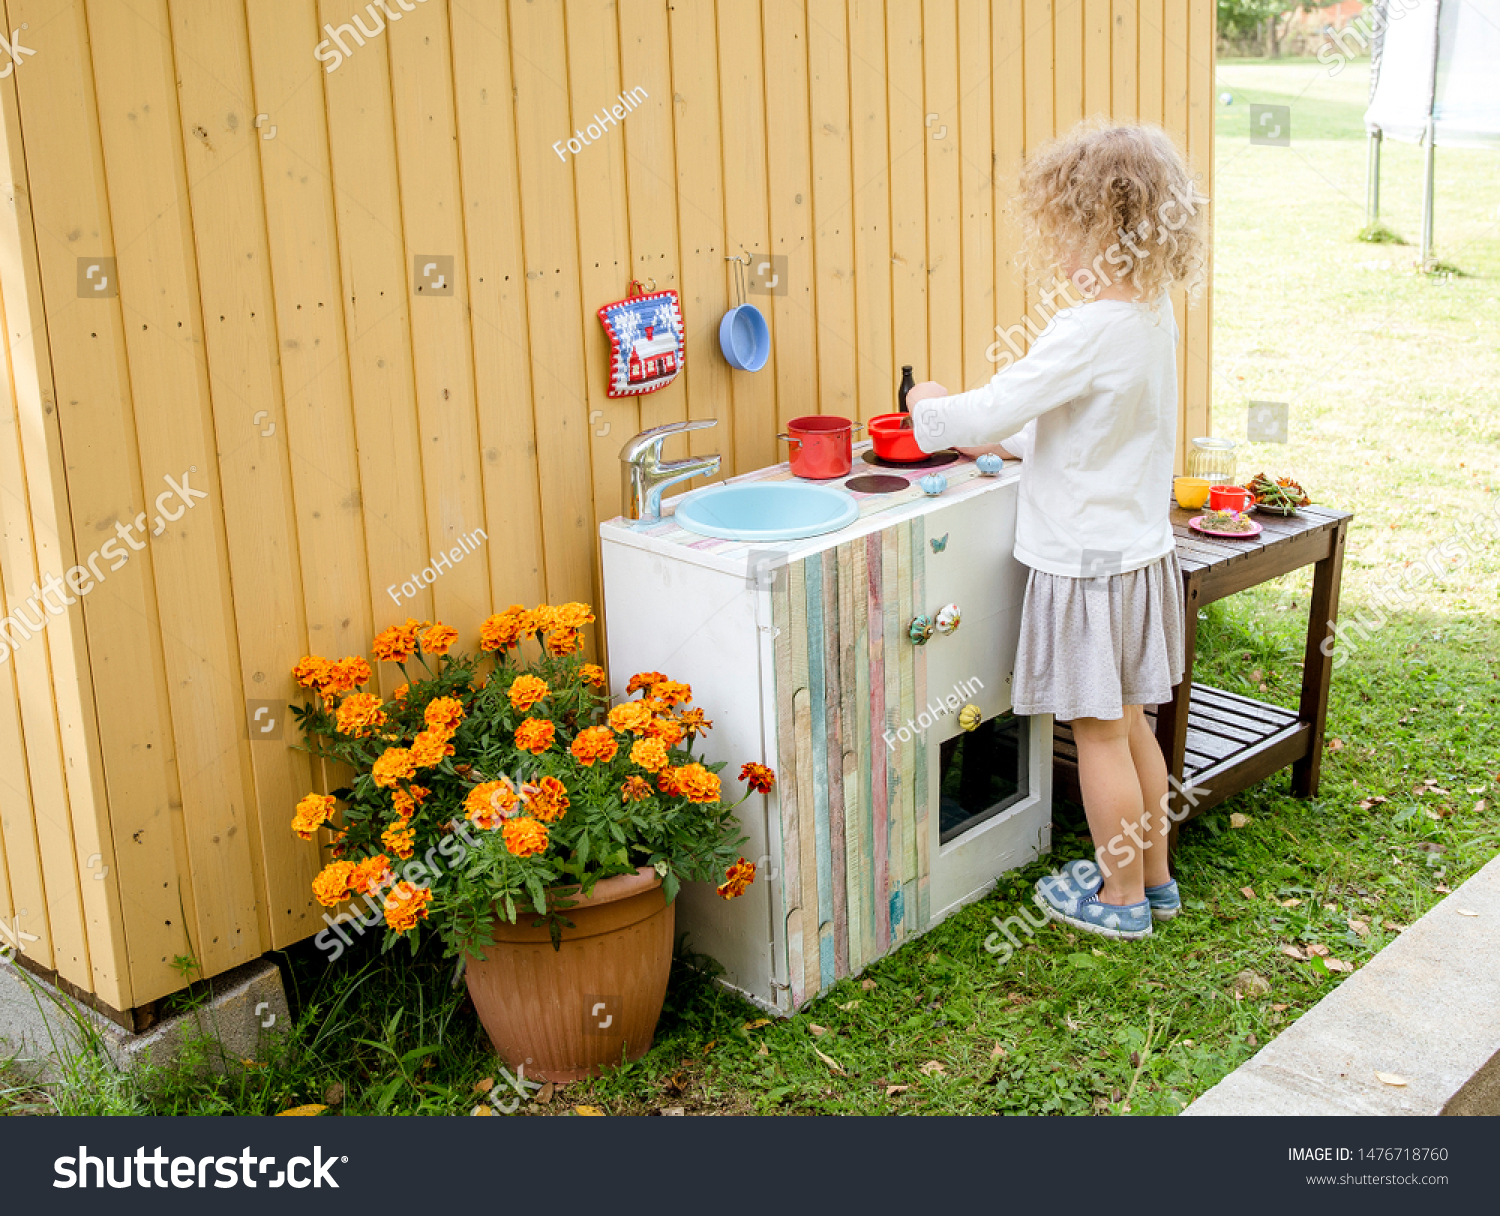 Young girl child playing outdoors in so called mud kitchen, where you can make fake food, play with sand, dirt, water, plants and make a mess, it develops imagination and exploration. #1476718760